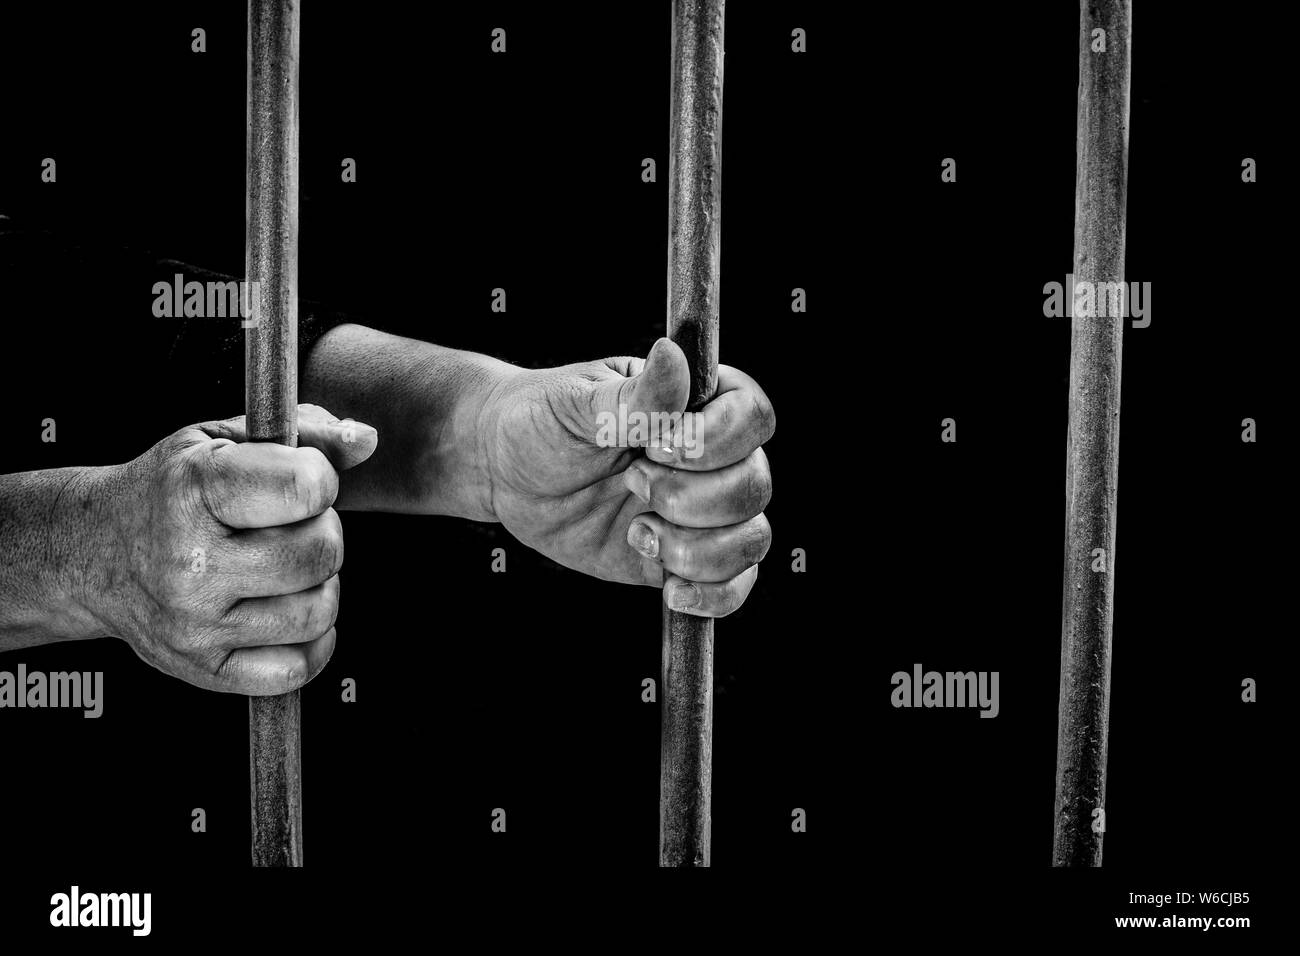 imprisoned in a dark prison holding the bars of a prison cell awaiting justice Stock Photo